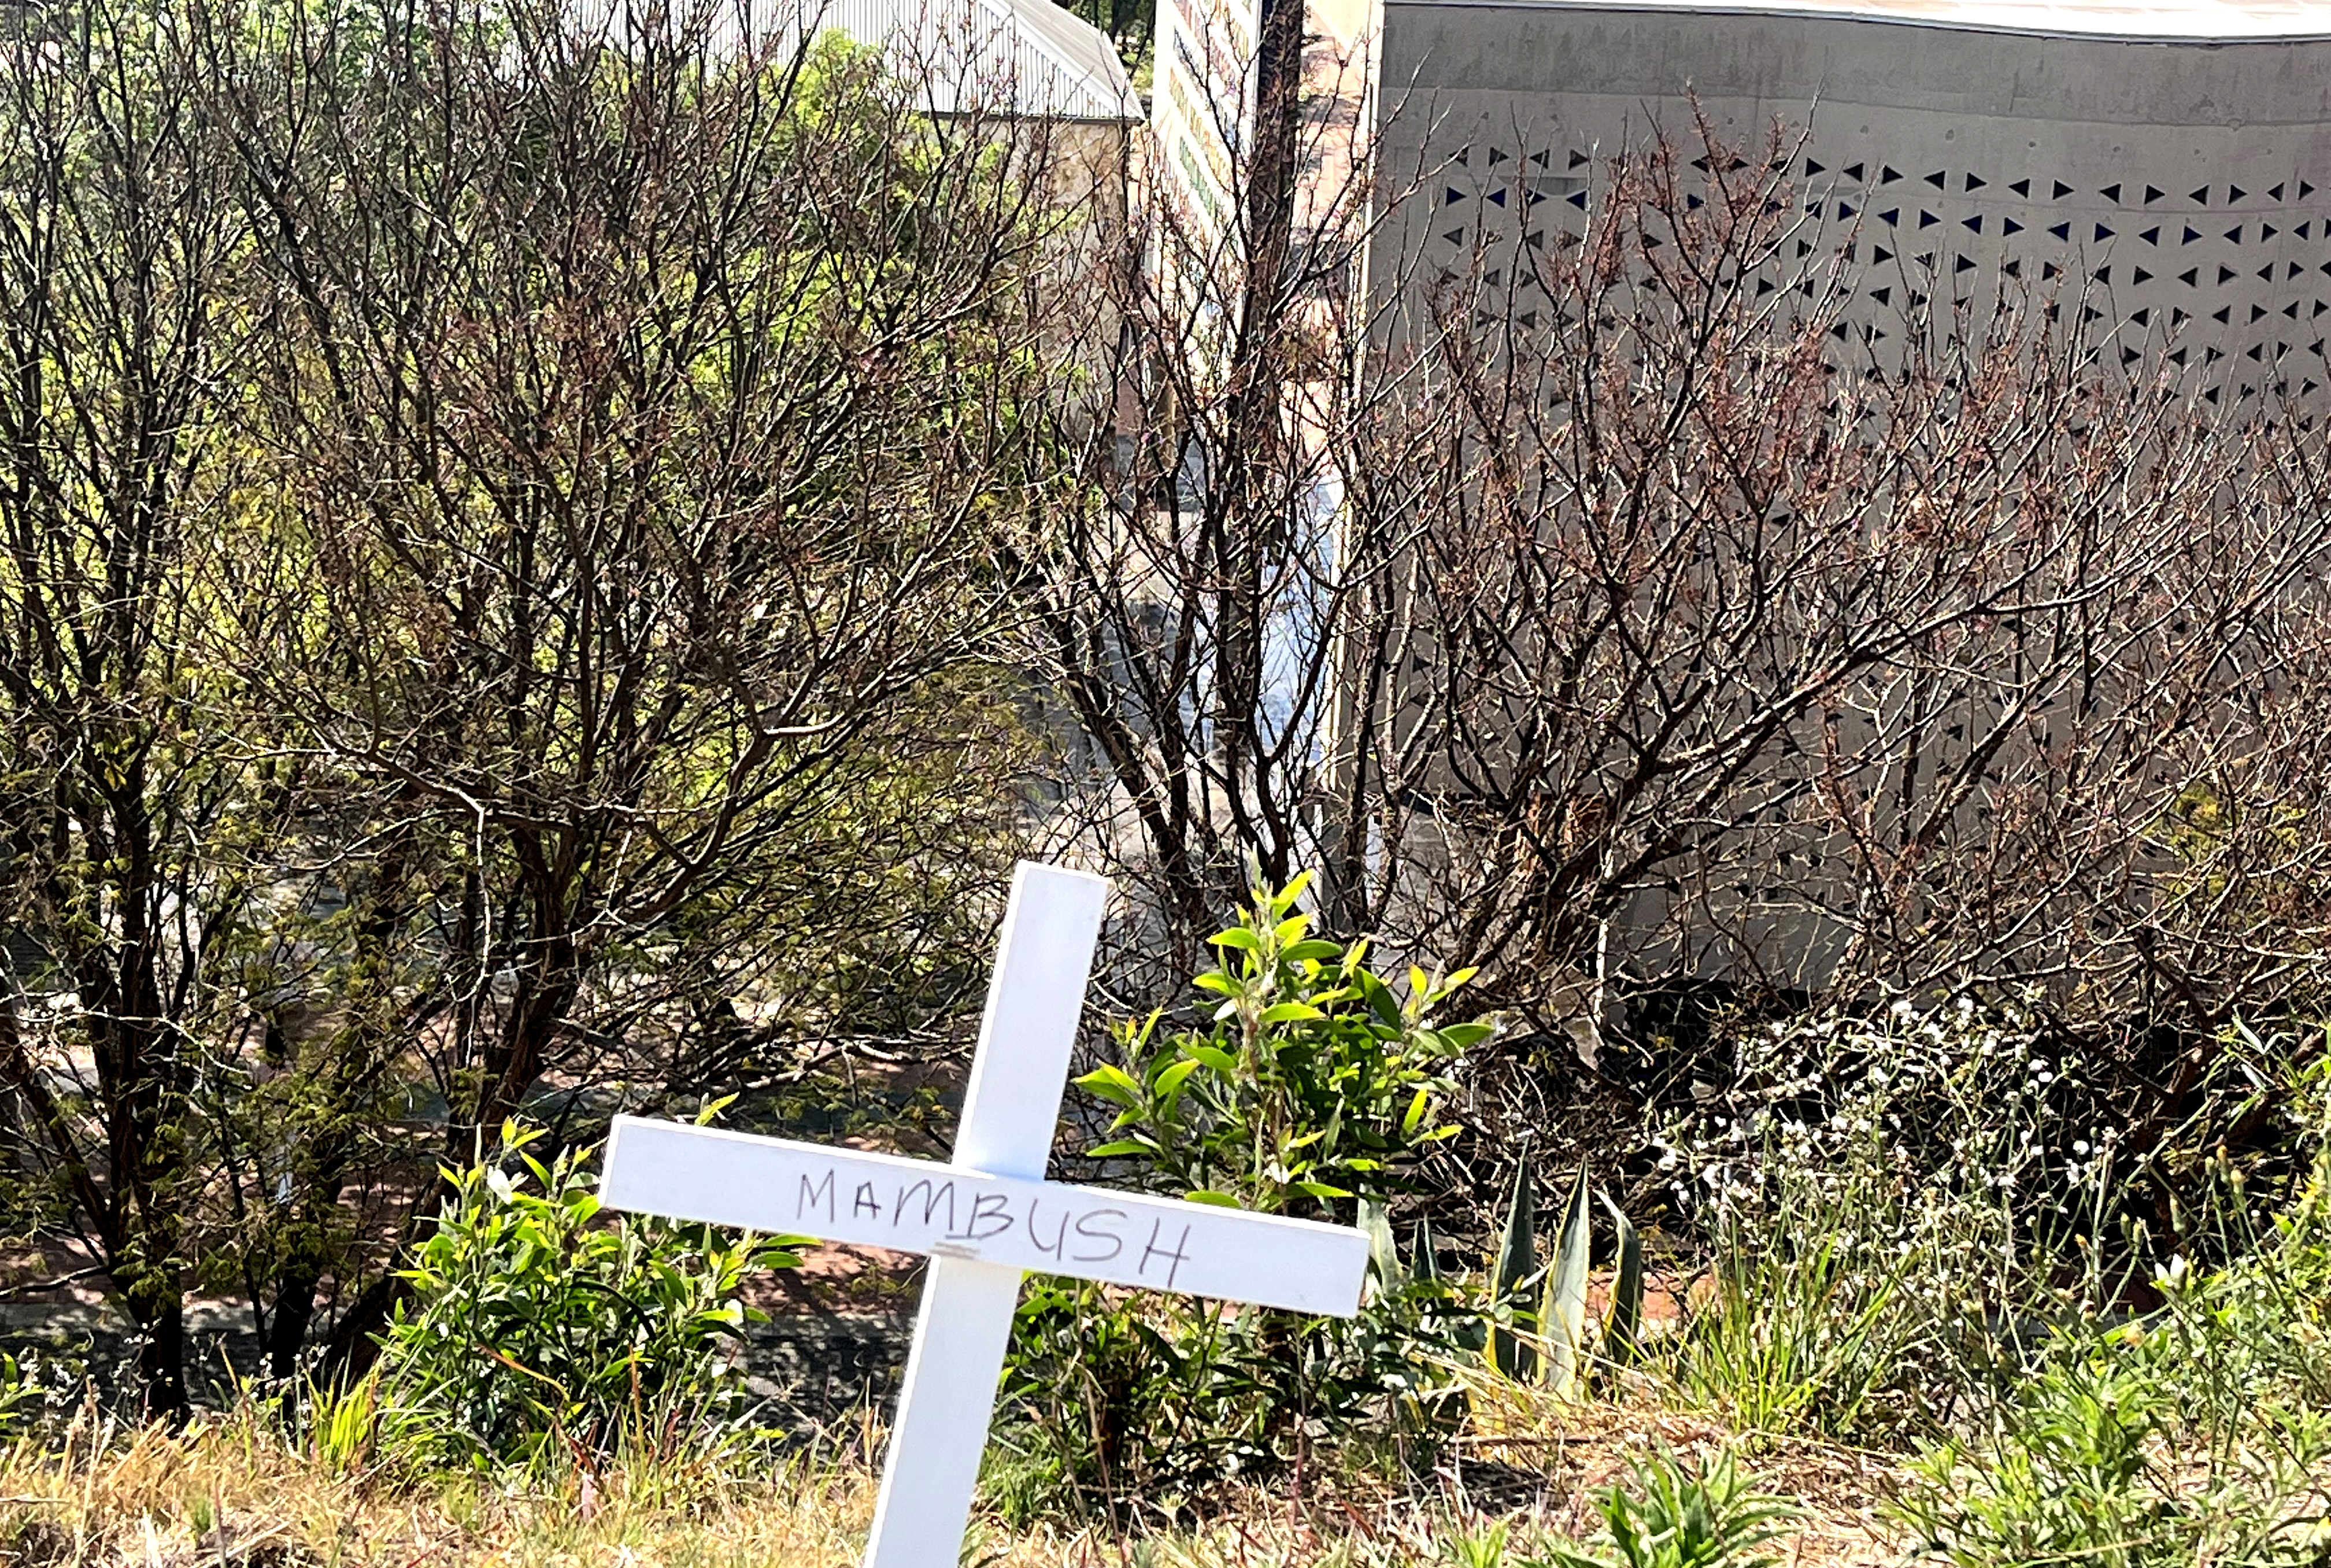 Justice and injustice: A cross memorialising the murder of Mgcineni "Mambush" Noki, one of the leaders of the Marikana strikers, looks down from the Old Fort ramparts onto the entrance to the Constitutional Court in Johannesburg. Image: Mark Heywood